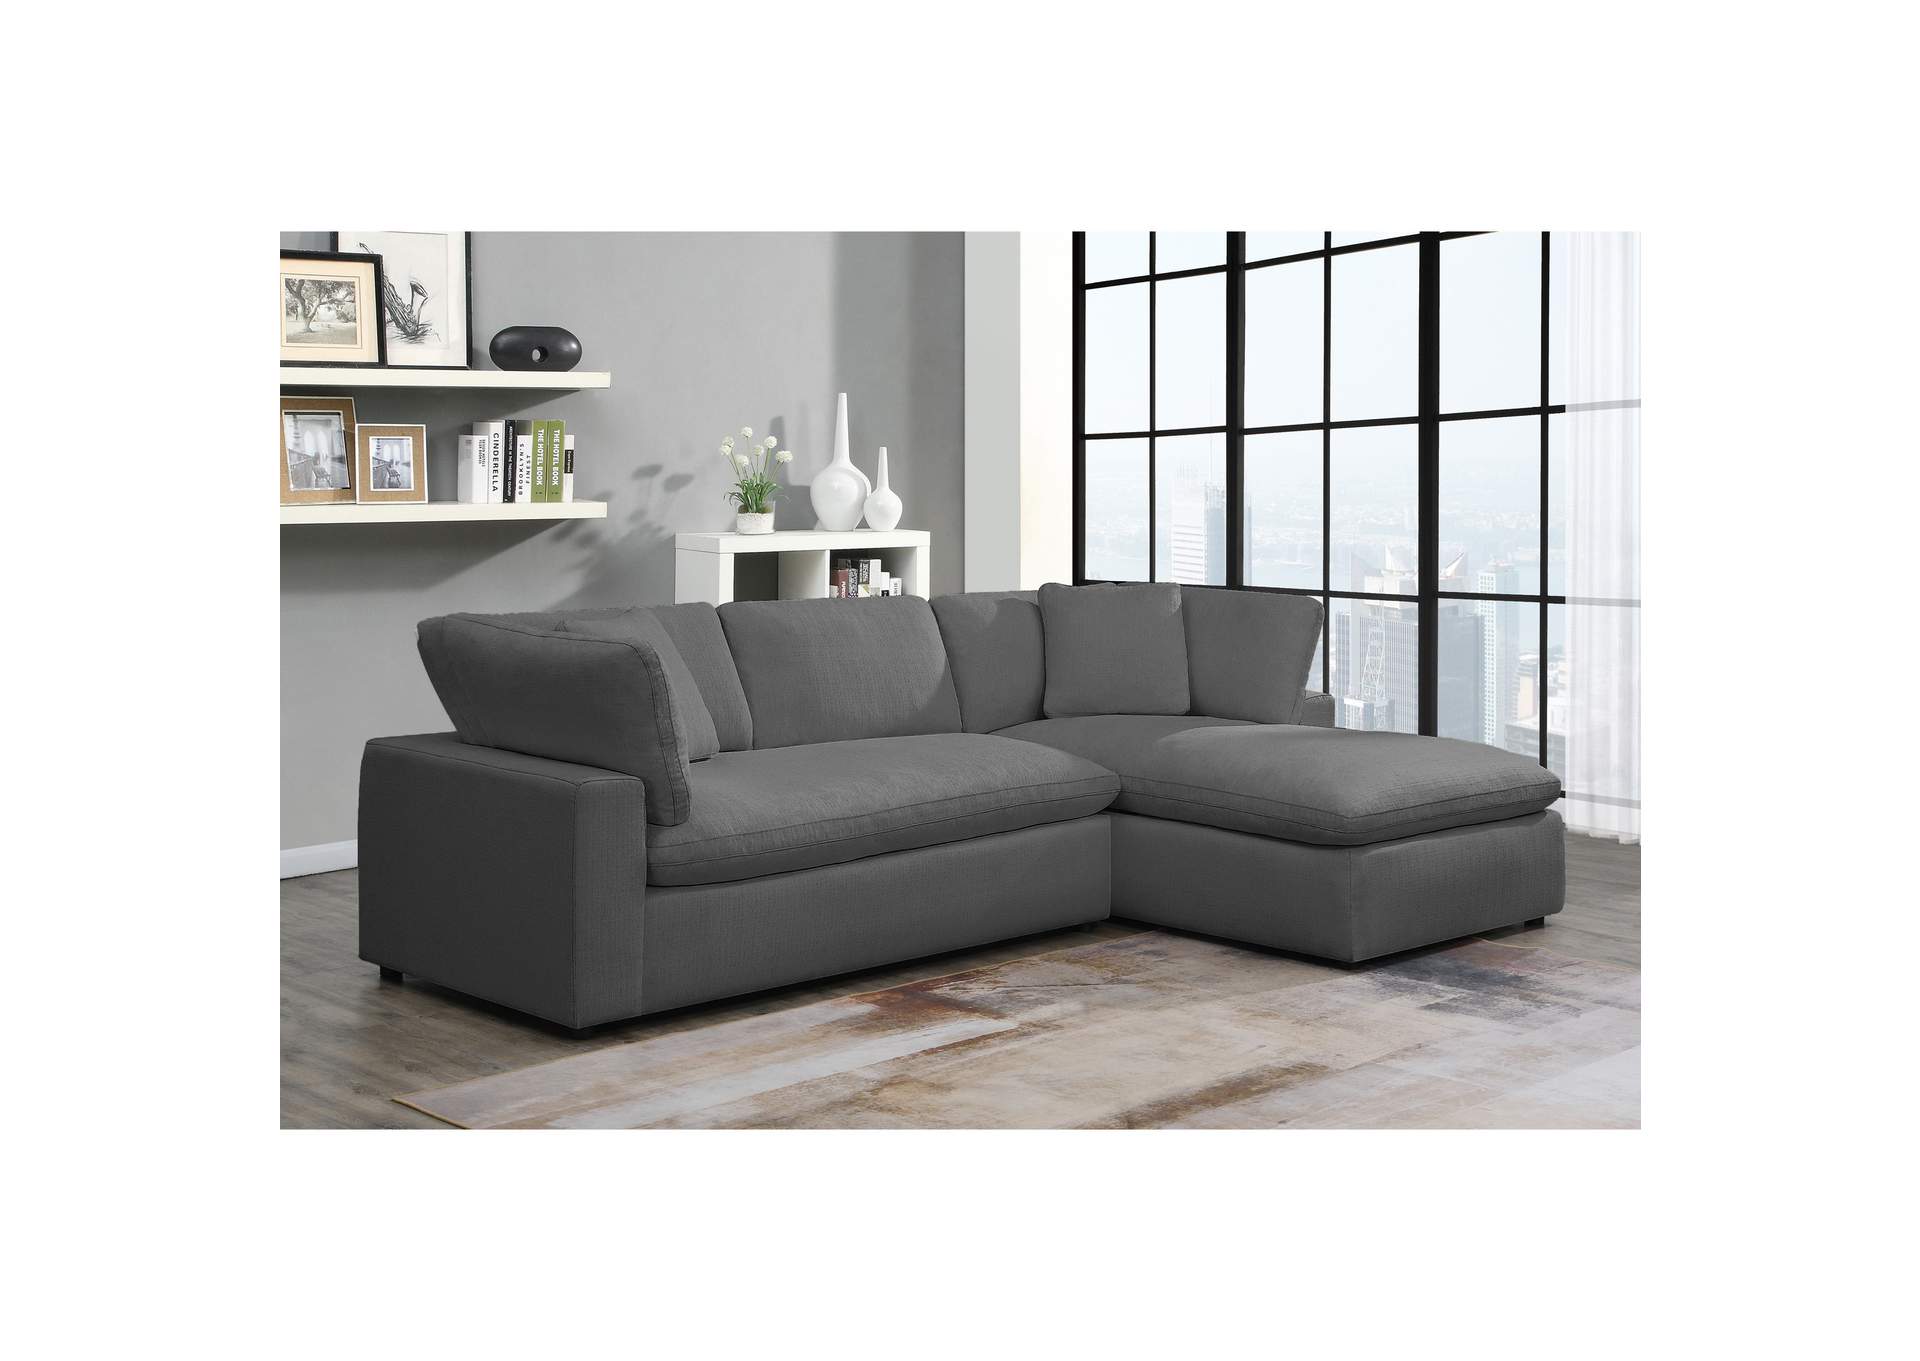 Cloud 9 Right Hand Facing Chaise In Garrison Charcoal,Elements